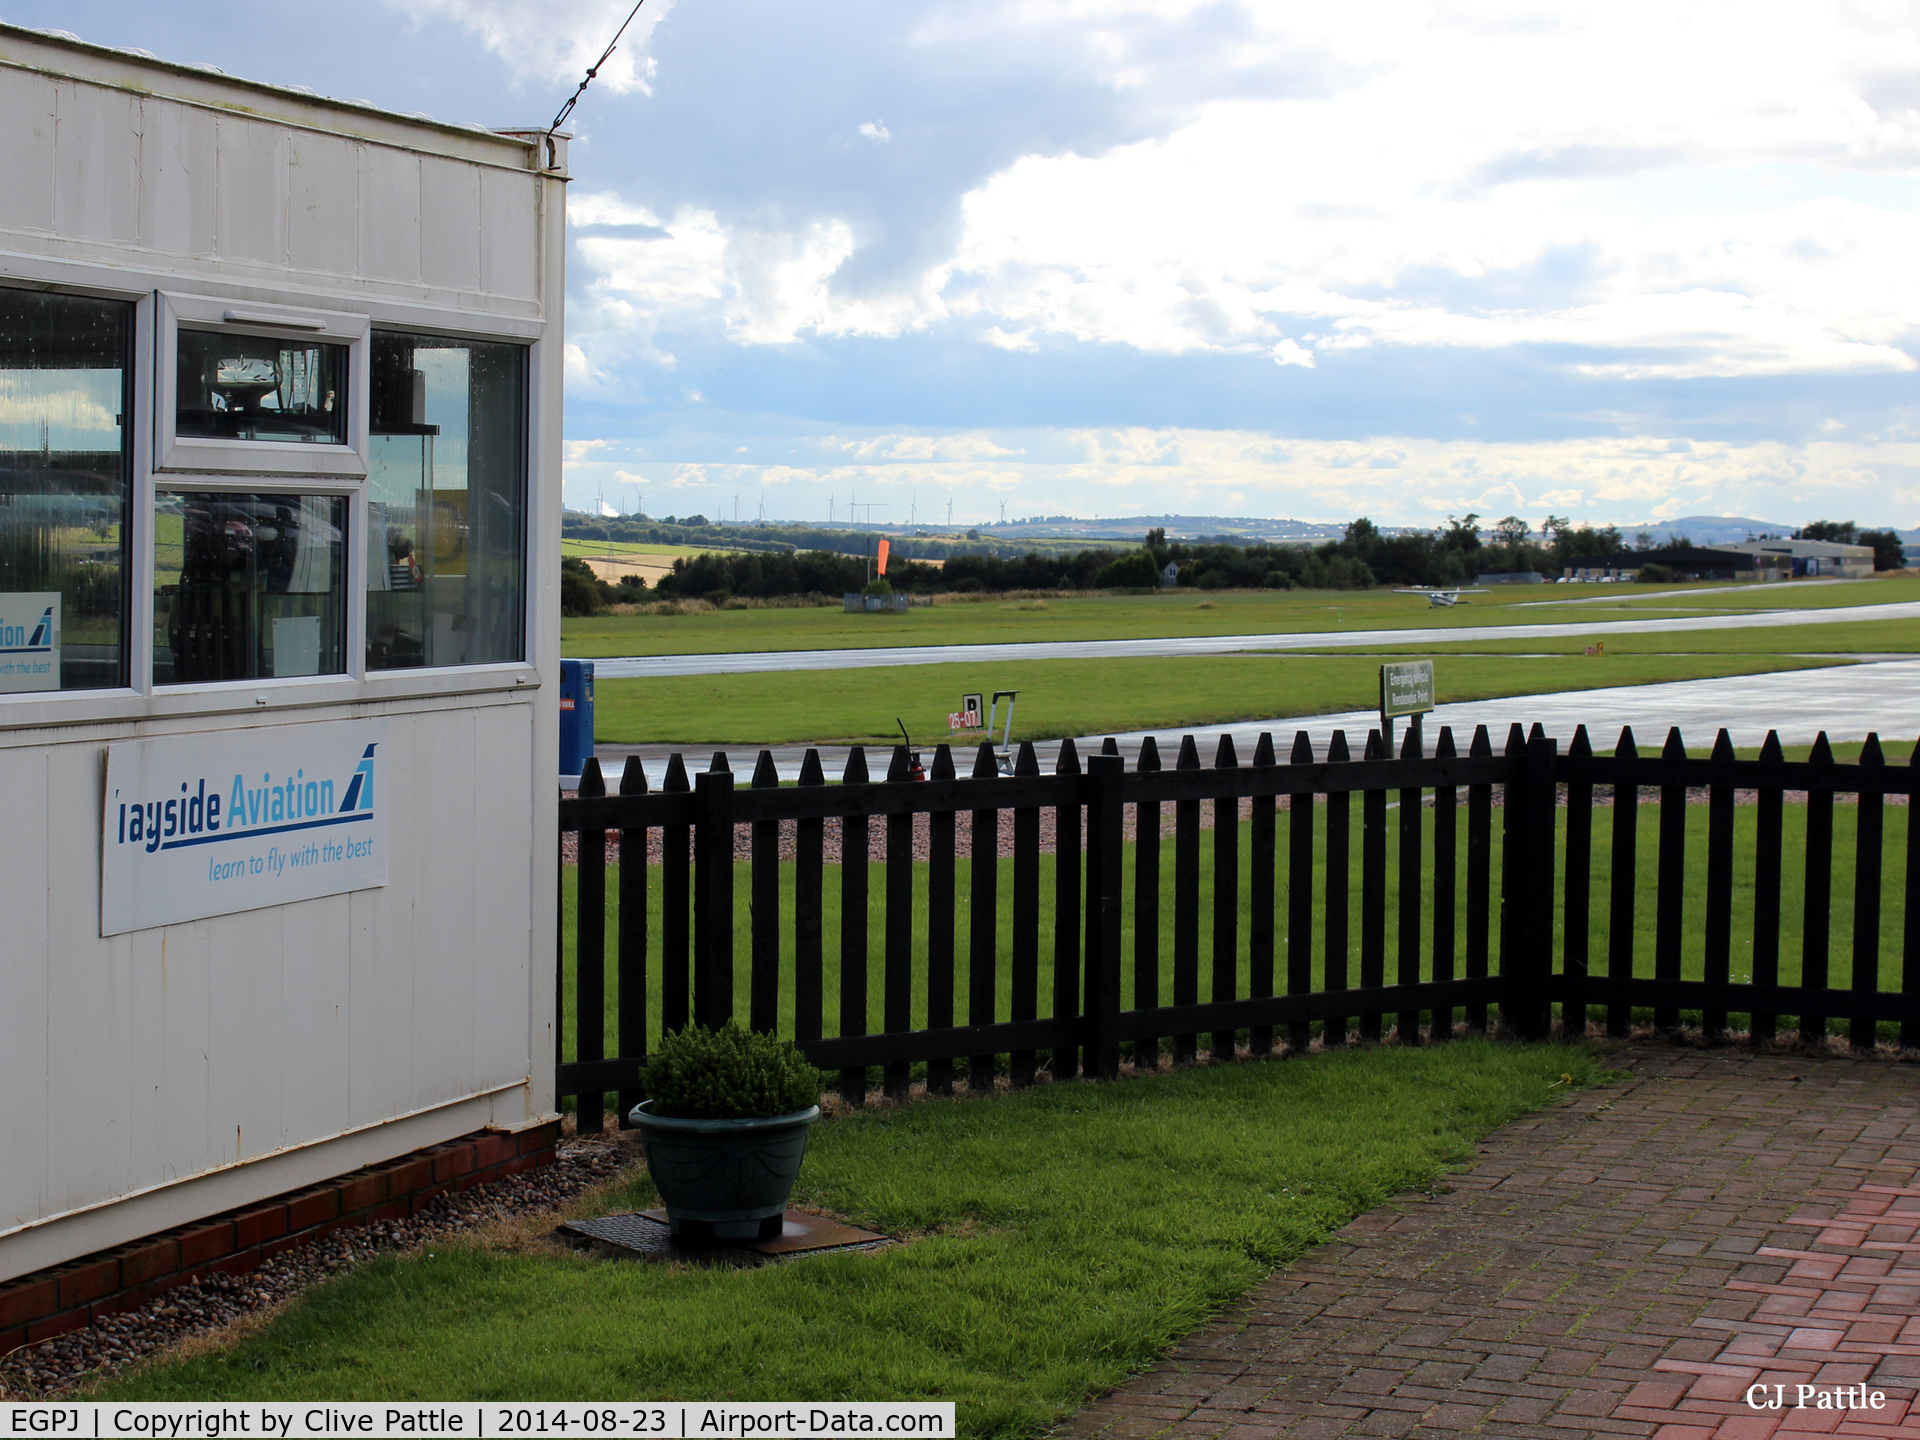 Fife Airport, Glenrothes, Scotland United Kingdom (EGPJ) - View from the Clubhouse patio area looking west at Glenrothes EGPJ